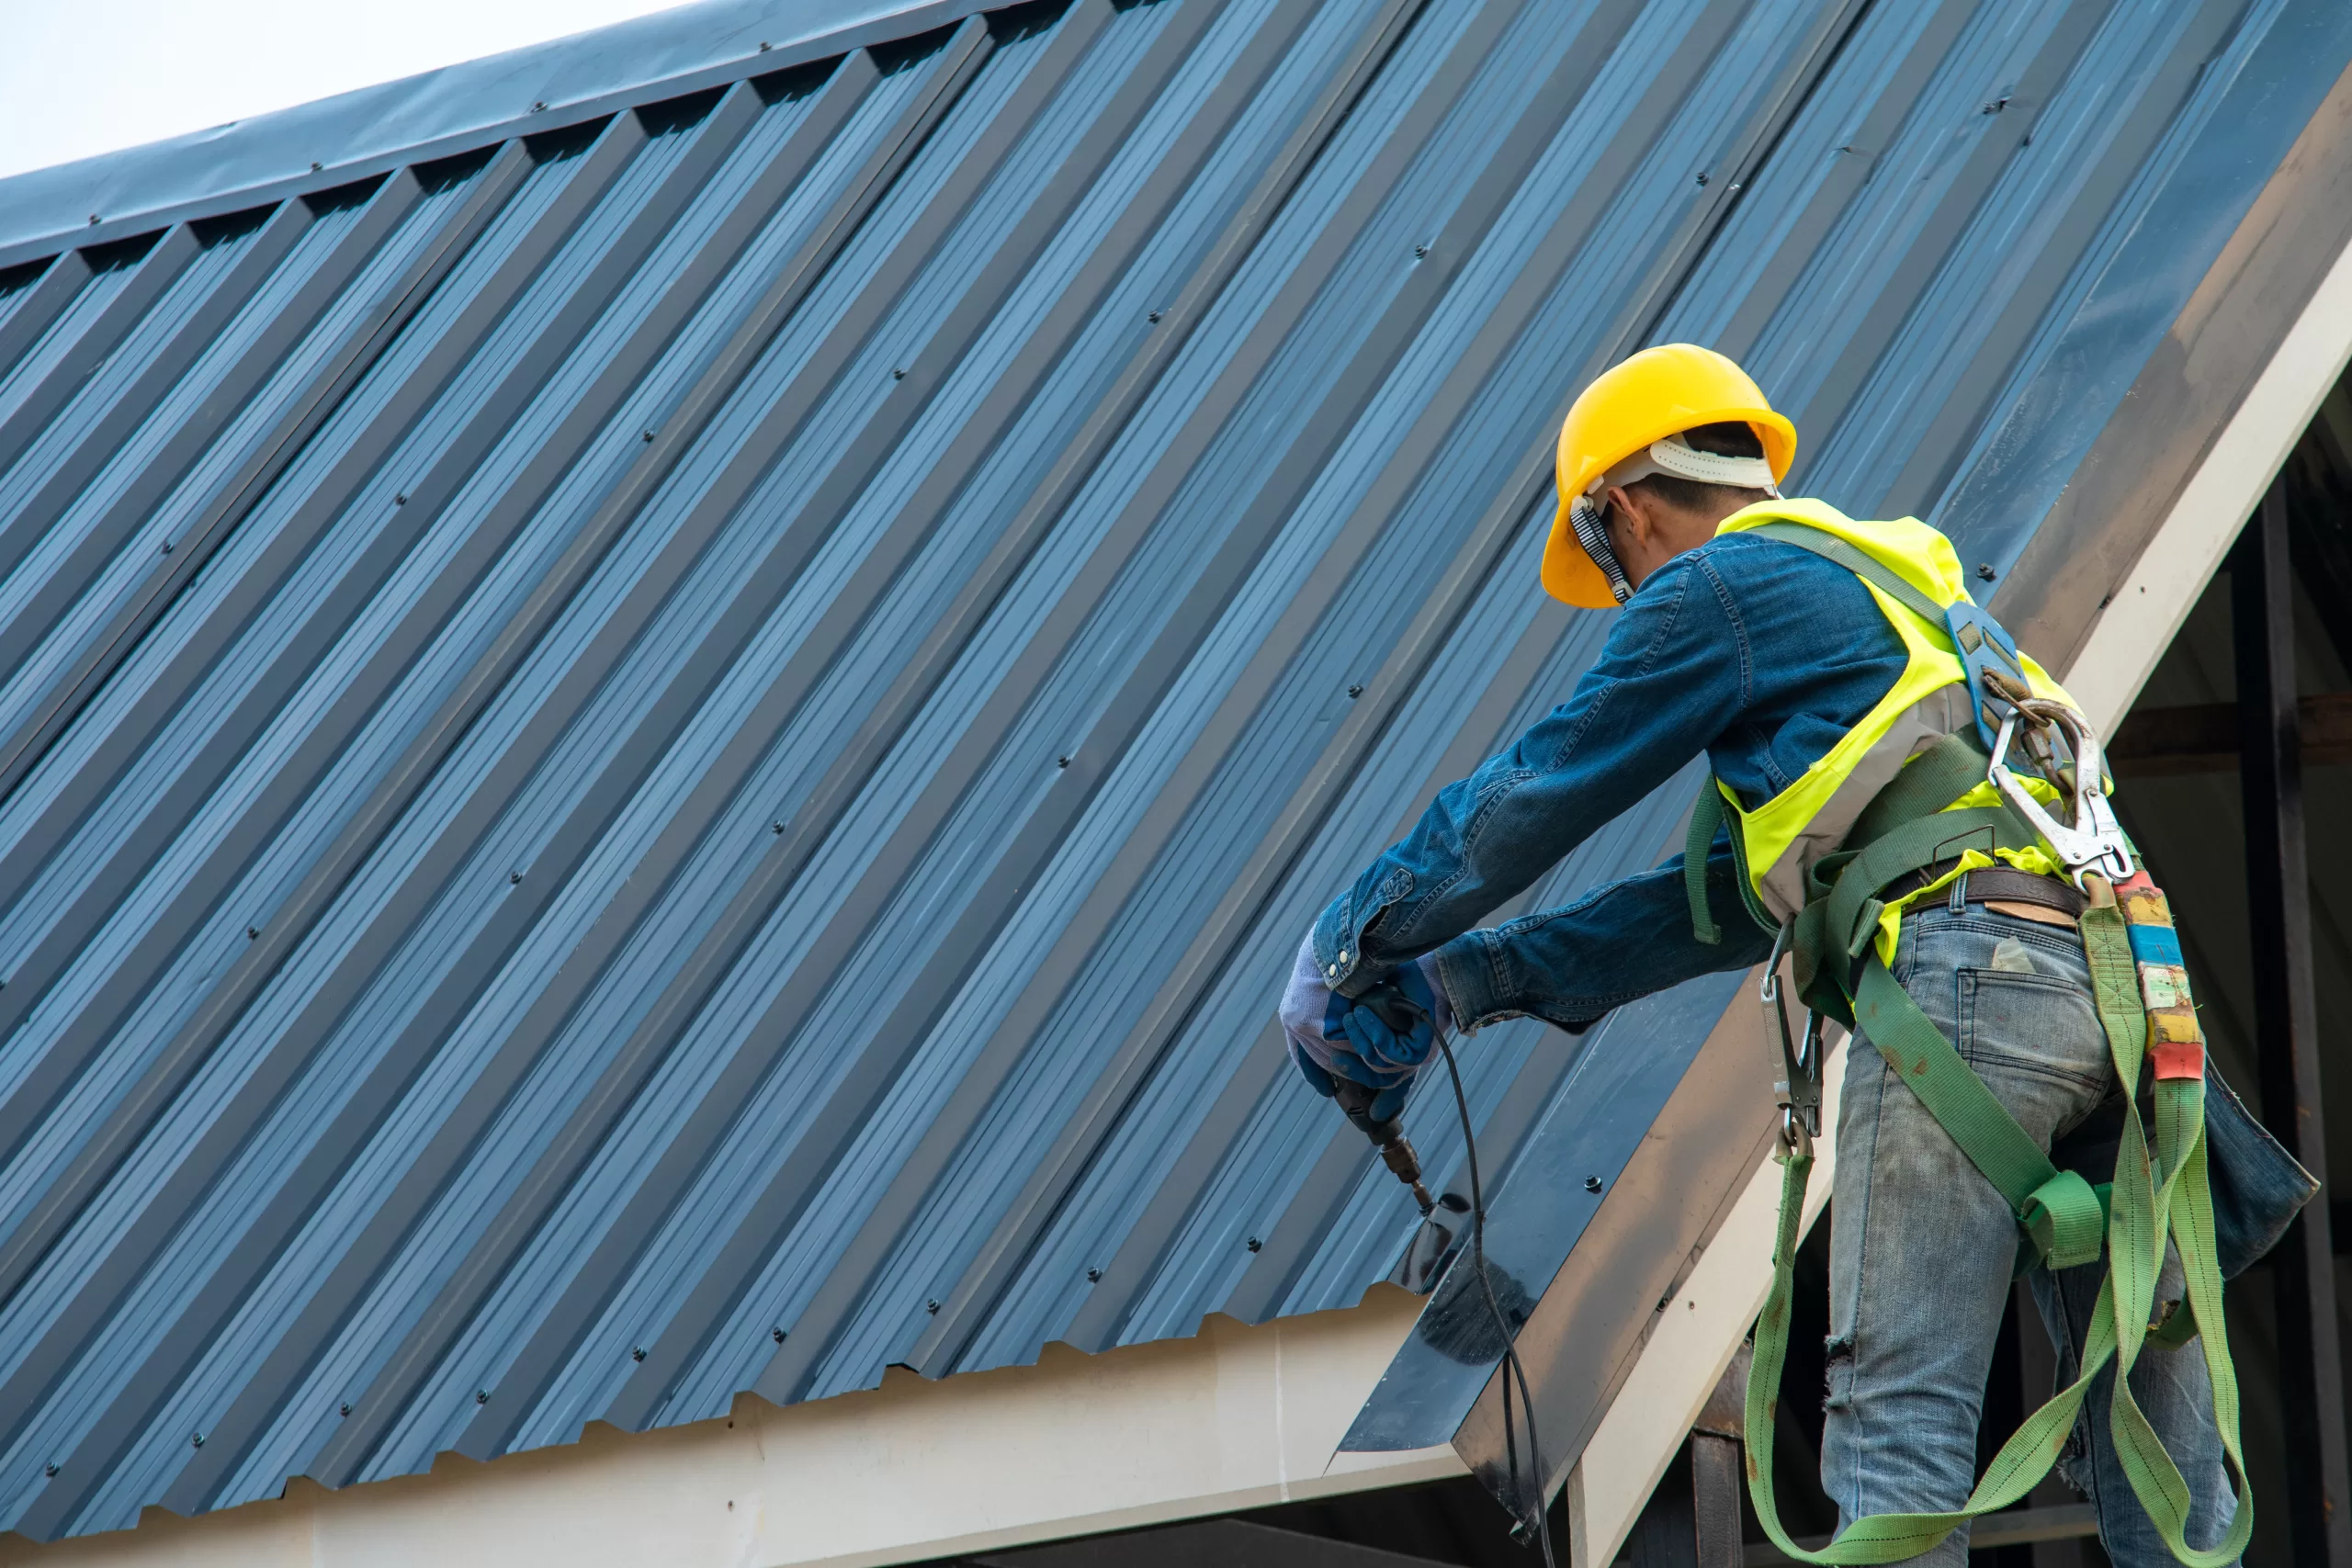 a roofer installing a metal roof on a building. Featured on a blog that discusses marketing for roofing companies